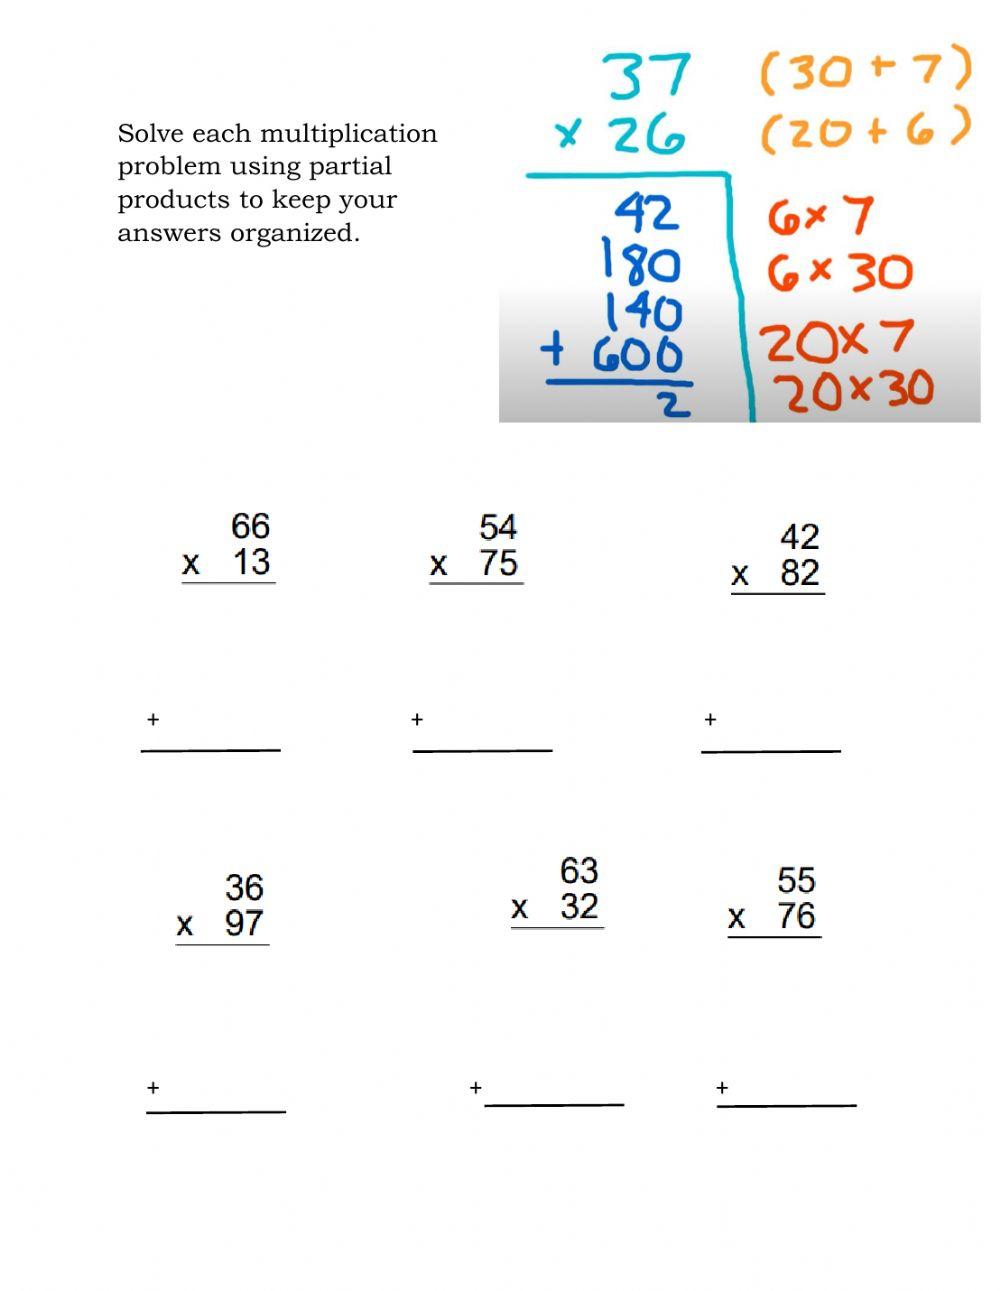 Multiplication using partial products